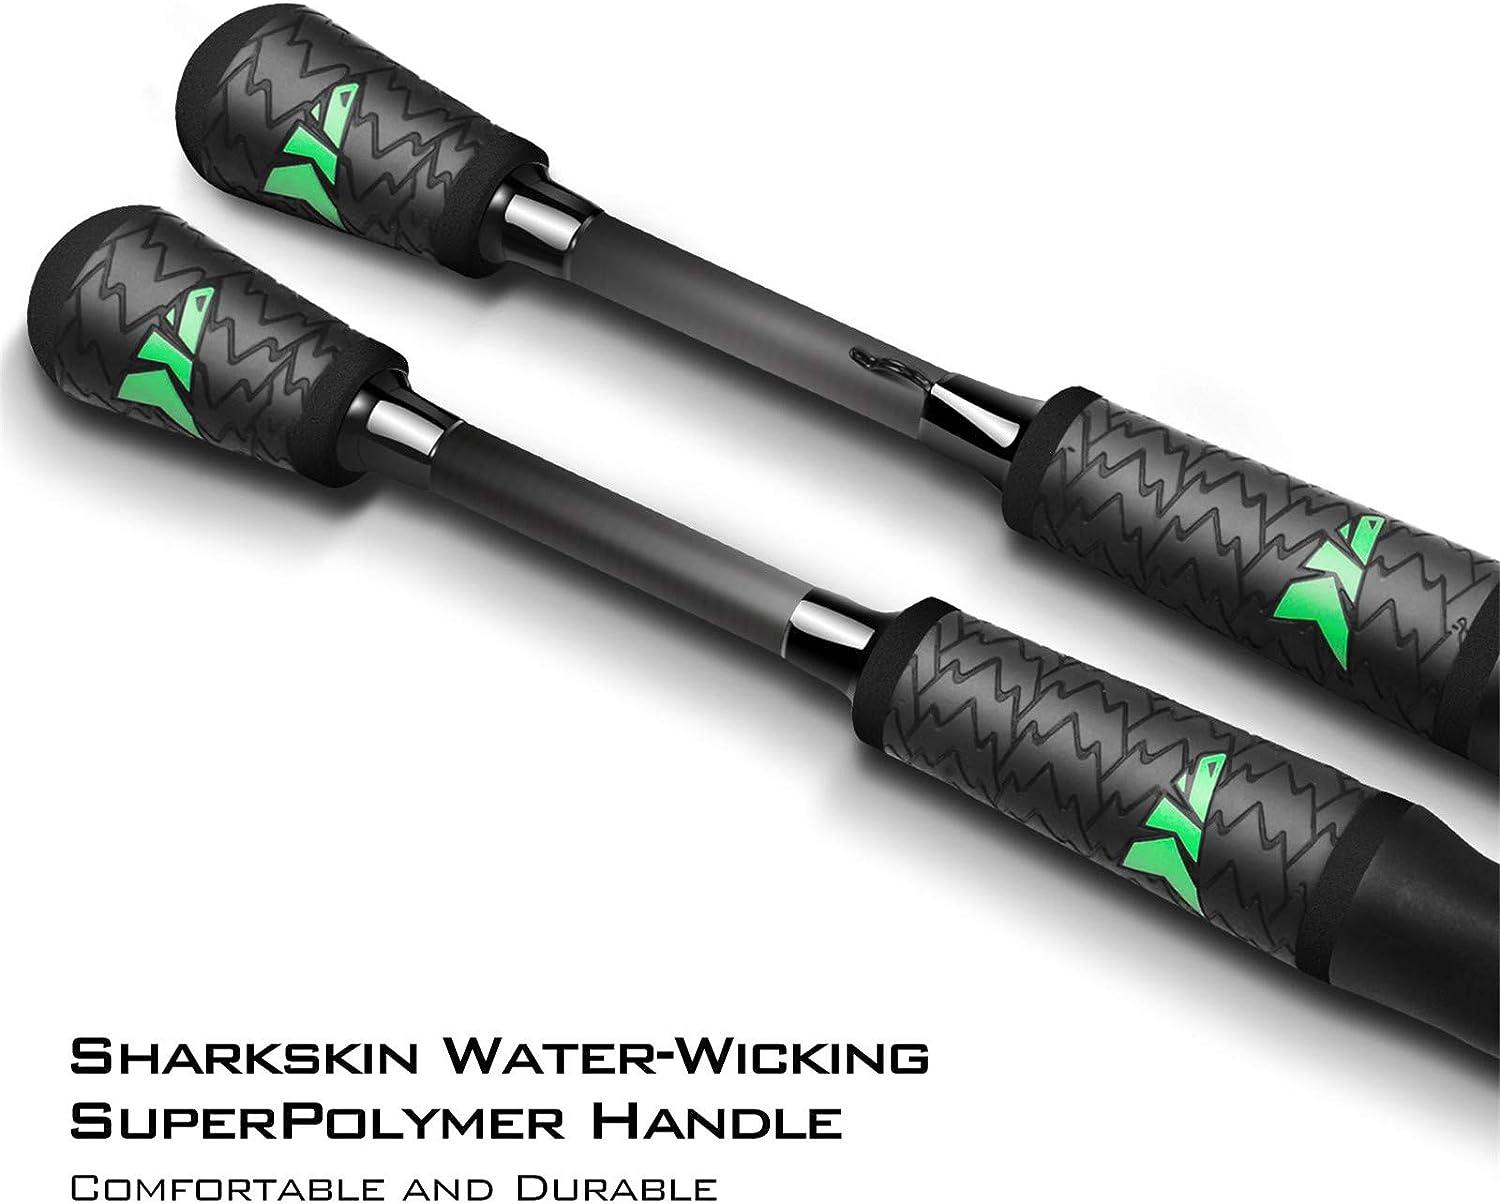  Fishing Rods Ultra-Sensitive Carbon Spinning Fish Rods Carbon  Fiber Casting Rod with Eva Grip Rod Handle for Fresh Saltwater Fishing  Tools : Sports & Outdoors